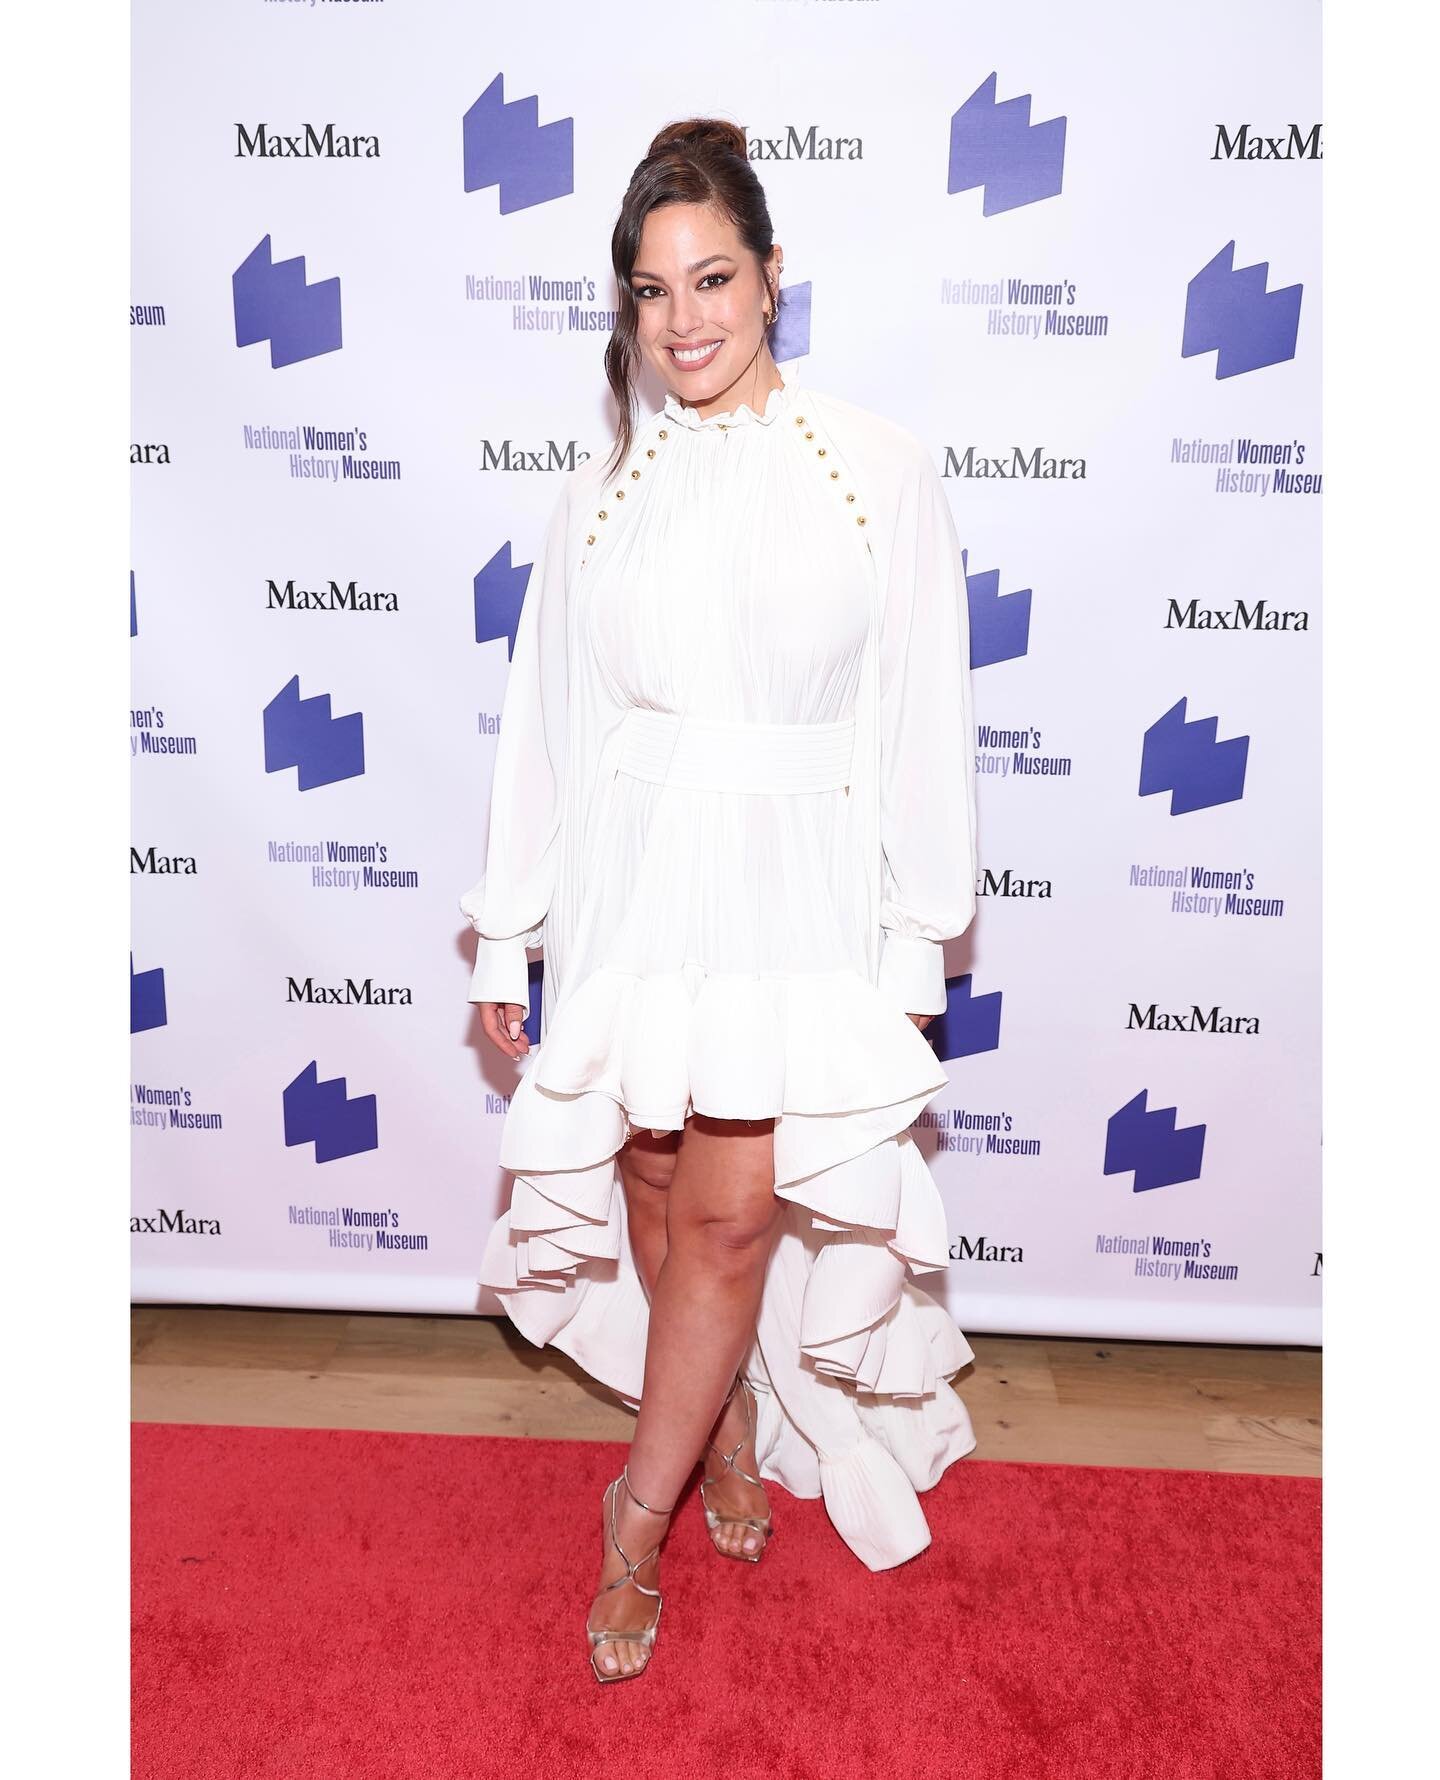 An incredible night of celebration and lifting up women's stories. We're so proud to have been a part of the amazing @womenshistory team bringing back the &quot;Women Making History&rdquo; Awards Gala. Thanks to our honorees @ashleygraham, @sharonsto